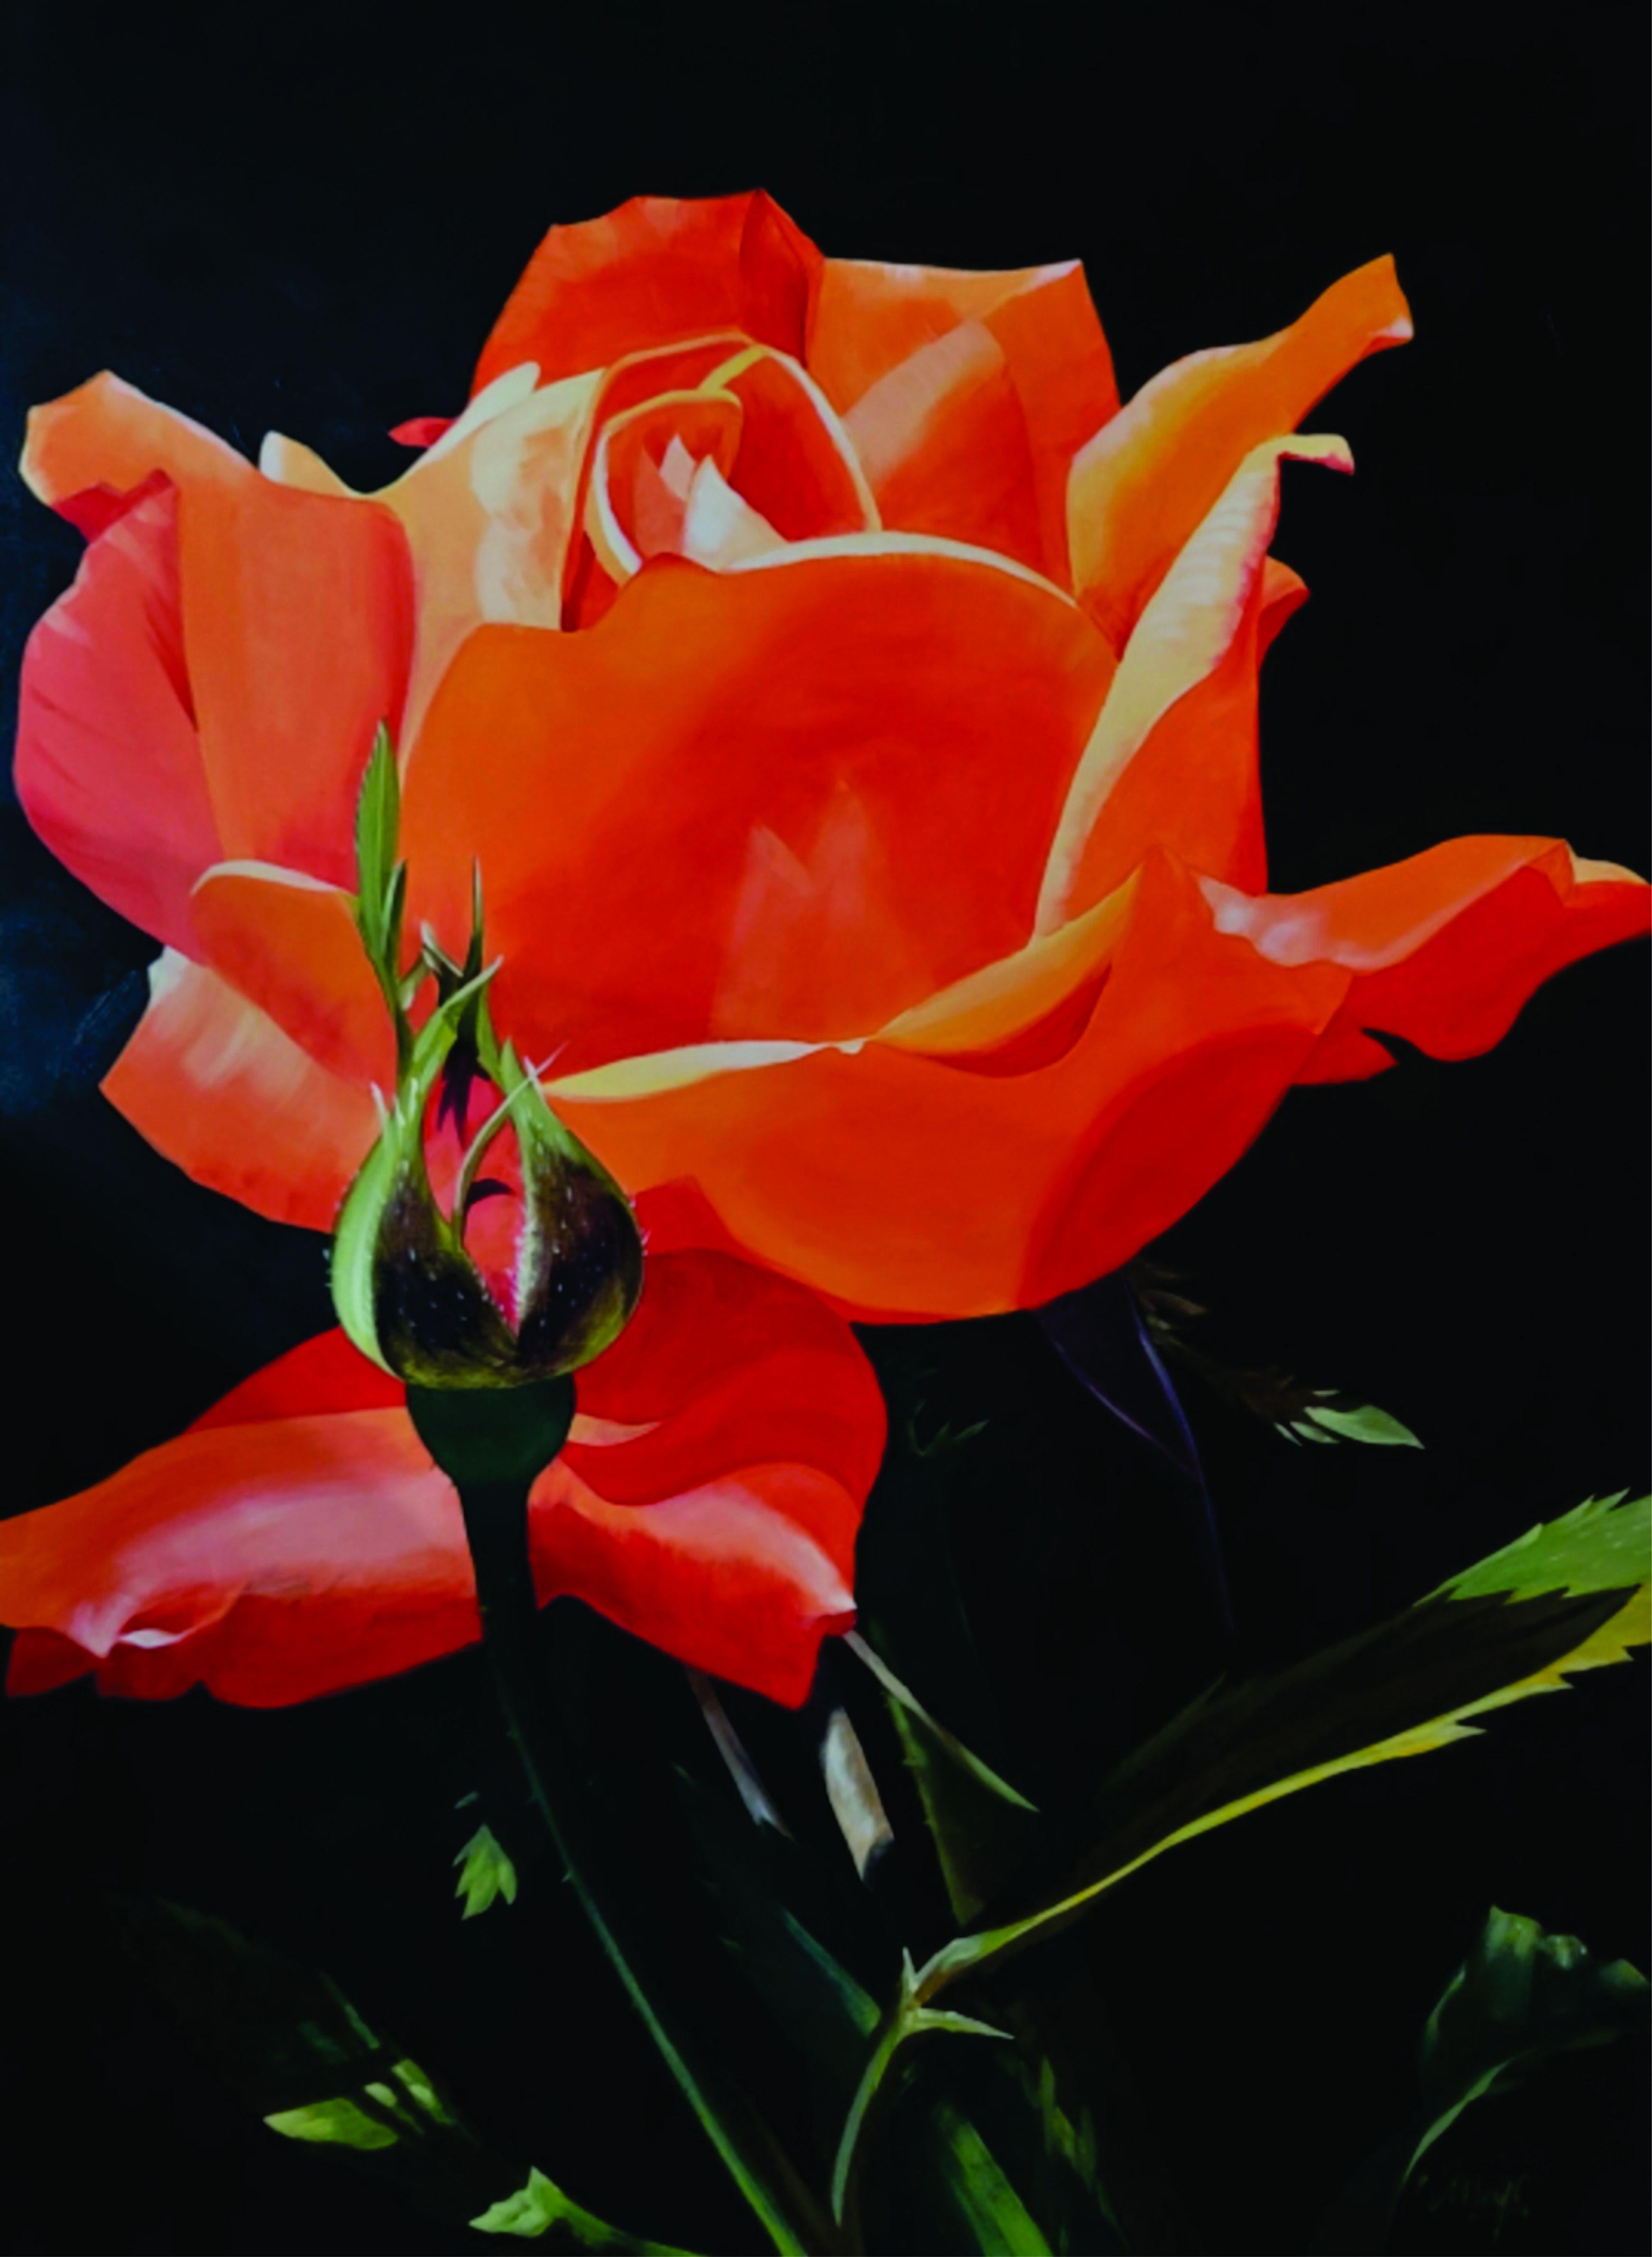 My Tangerine Rose is a single bloom of a Tangerine Rose. This is my favorite flower color as orange is usually a little rare to see in a garden, most garden flowers being yellow, pink, purple or white. Pictured here with the promise of a new bud